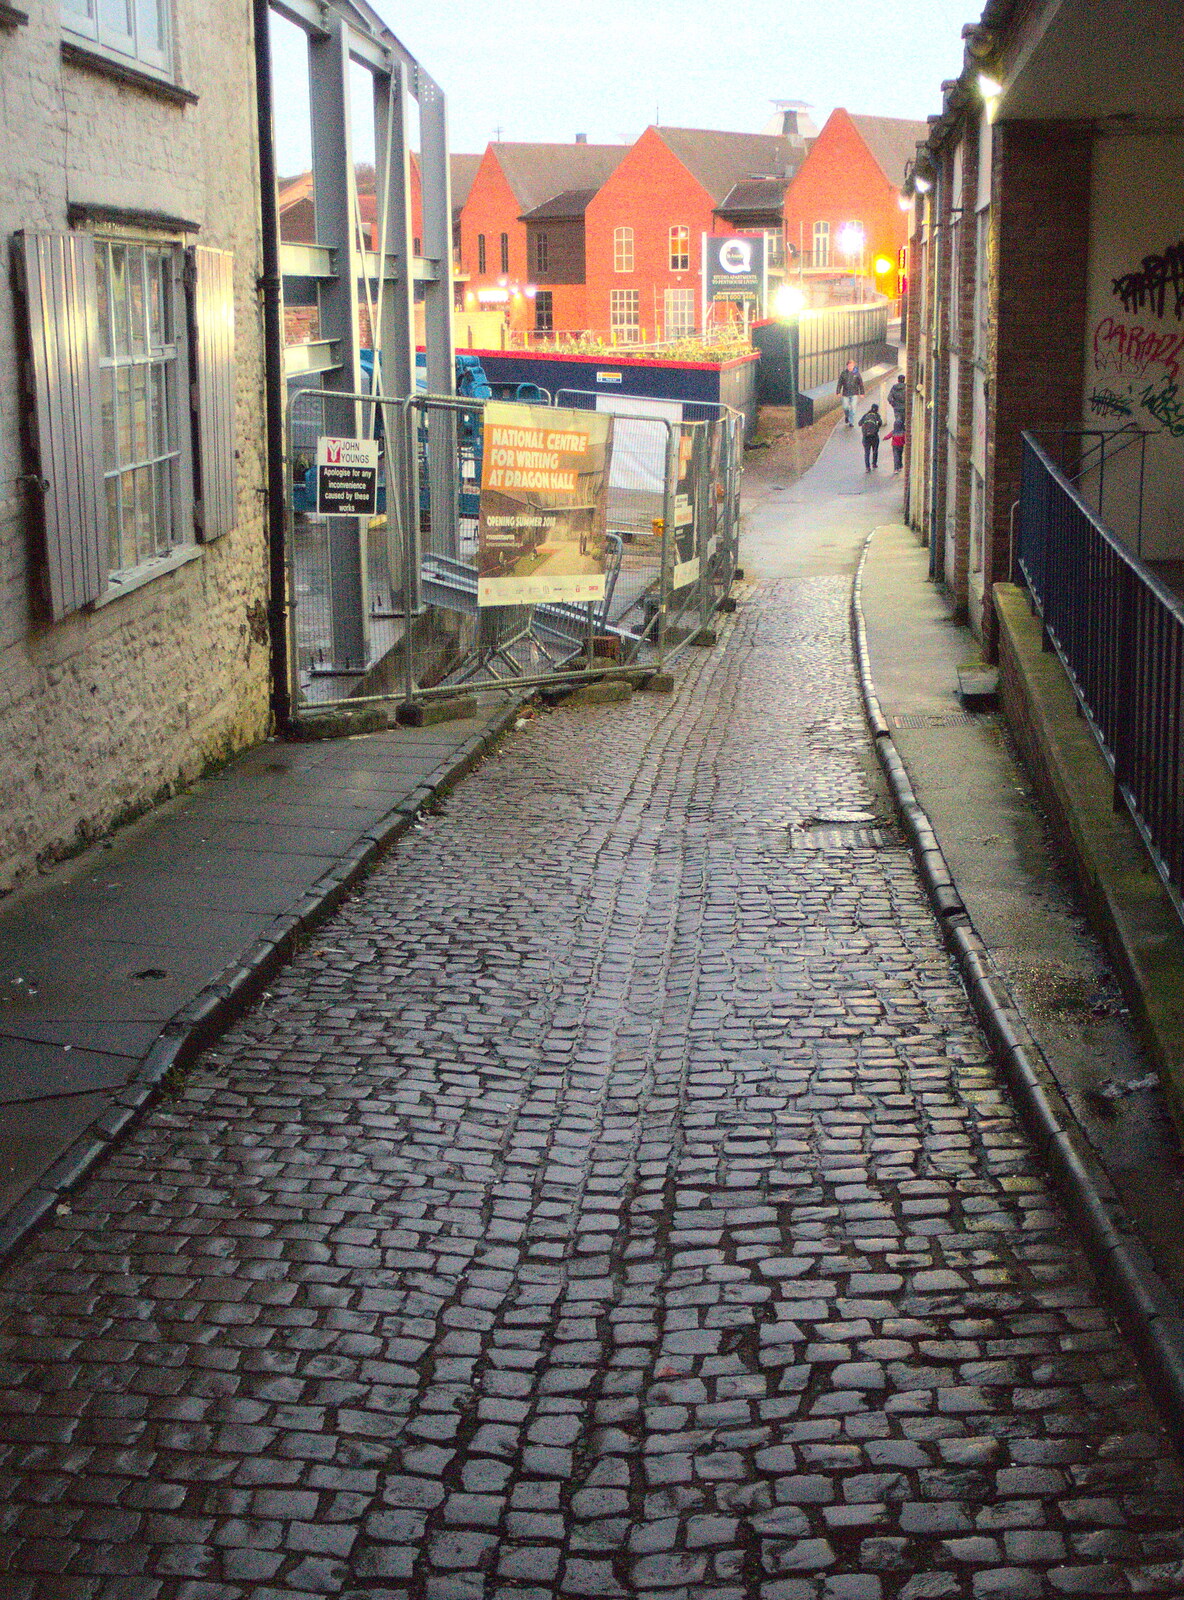 The cobbled alley back to Riverside from A Trip to the Cinema, Norwich, Norfolk - 3rd December 2017